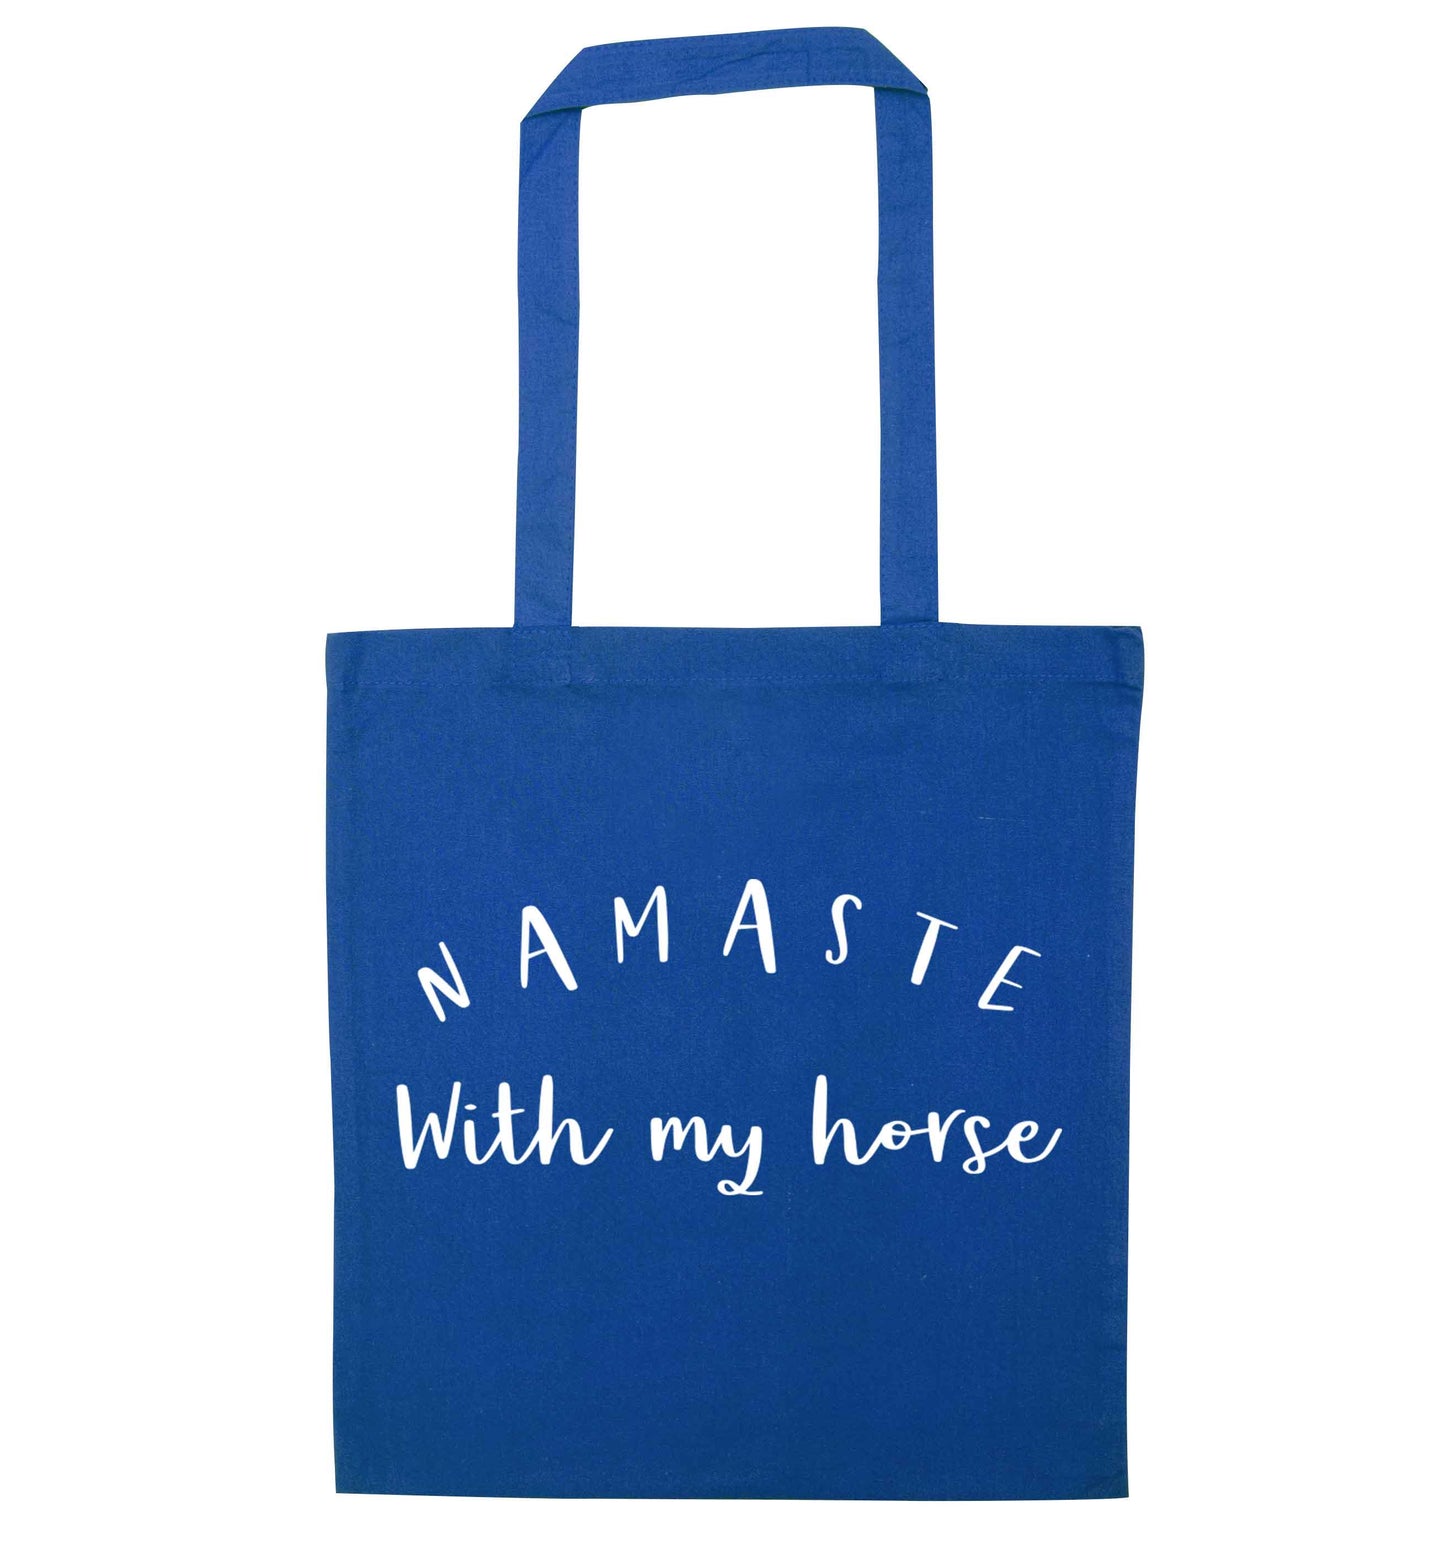 Namaste with my horse blue tote bag